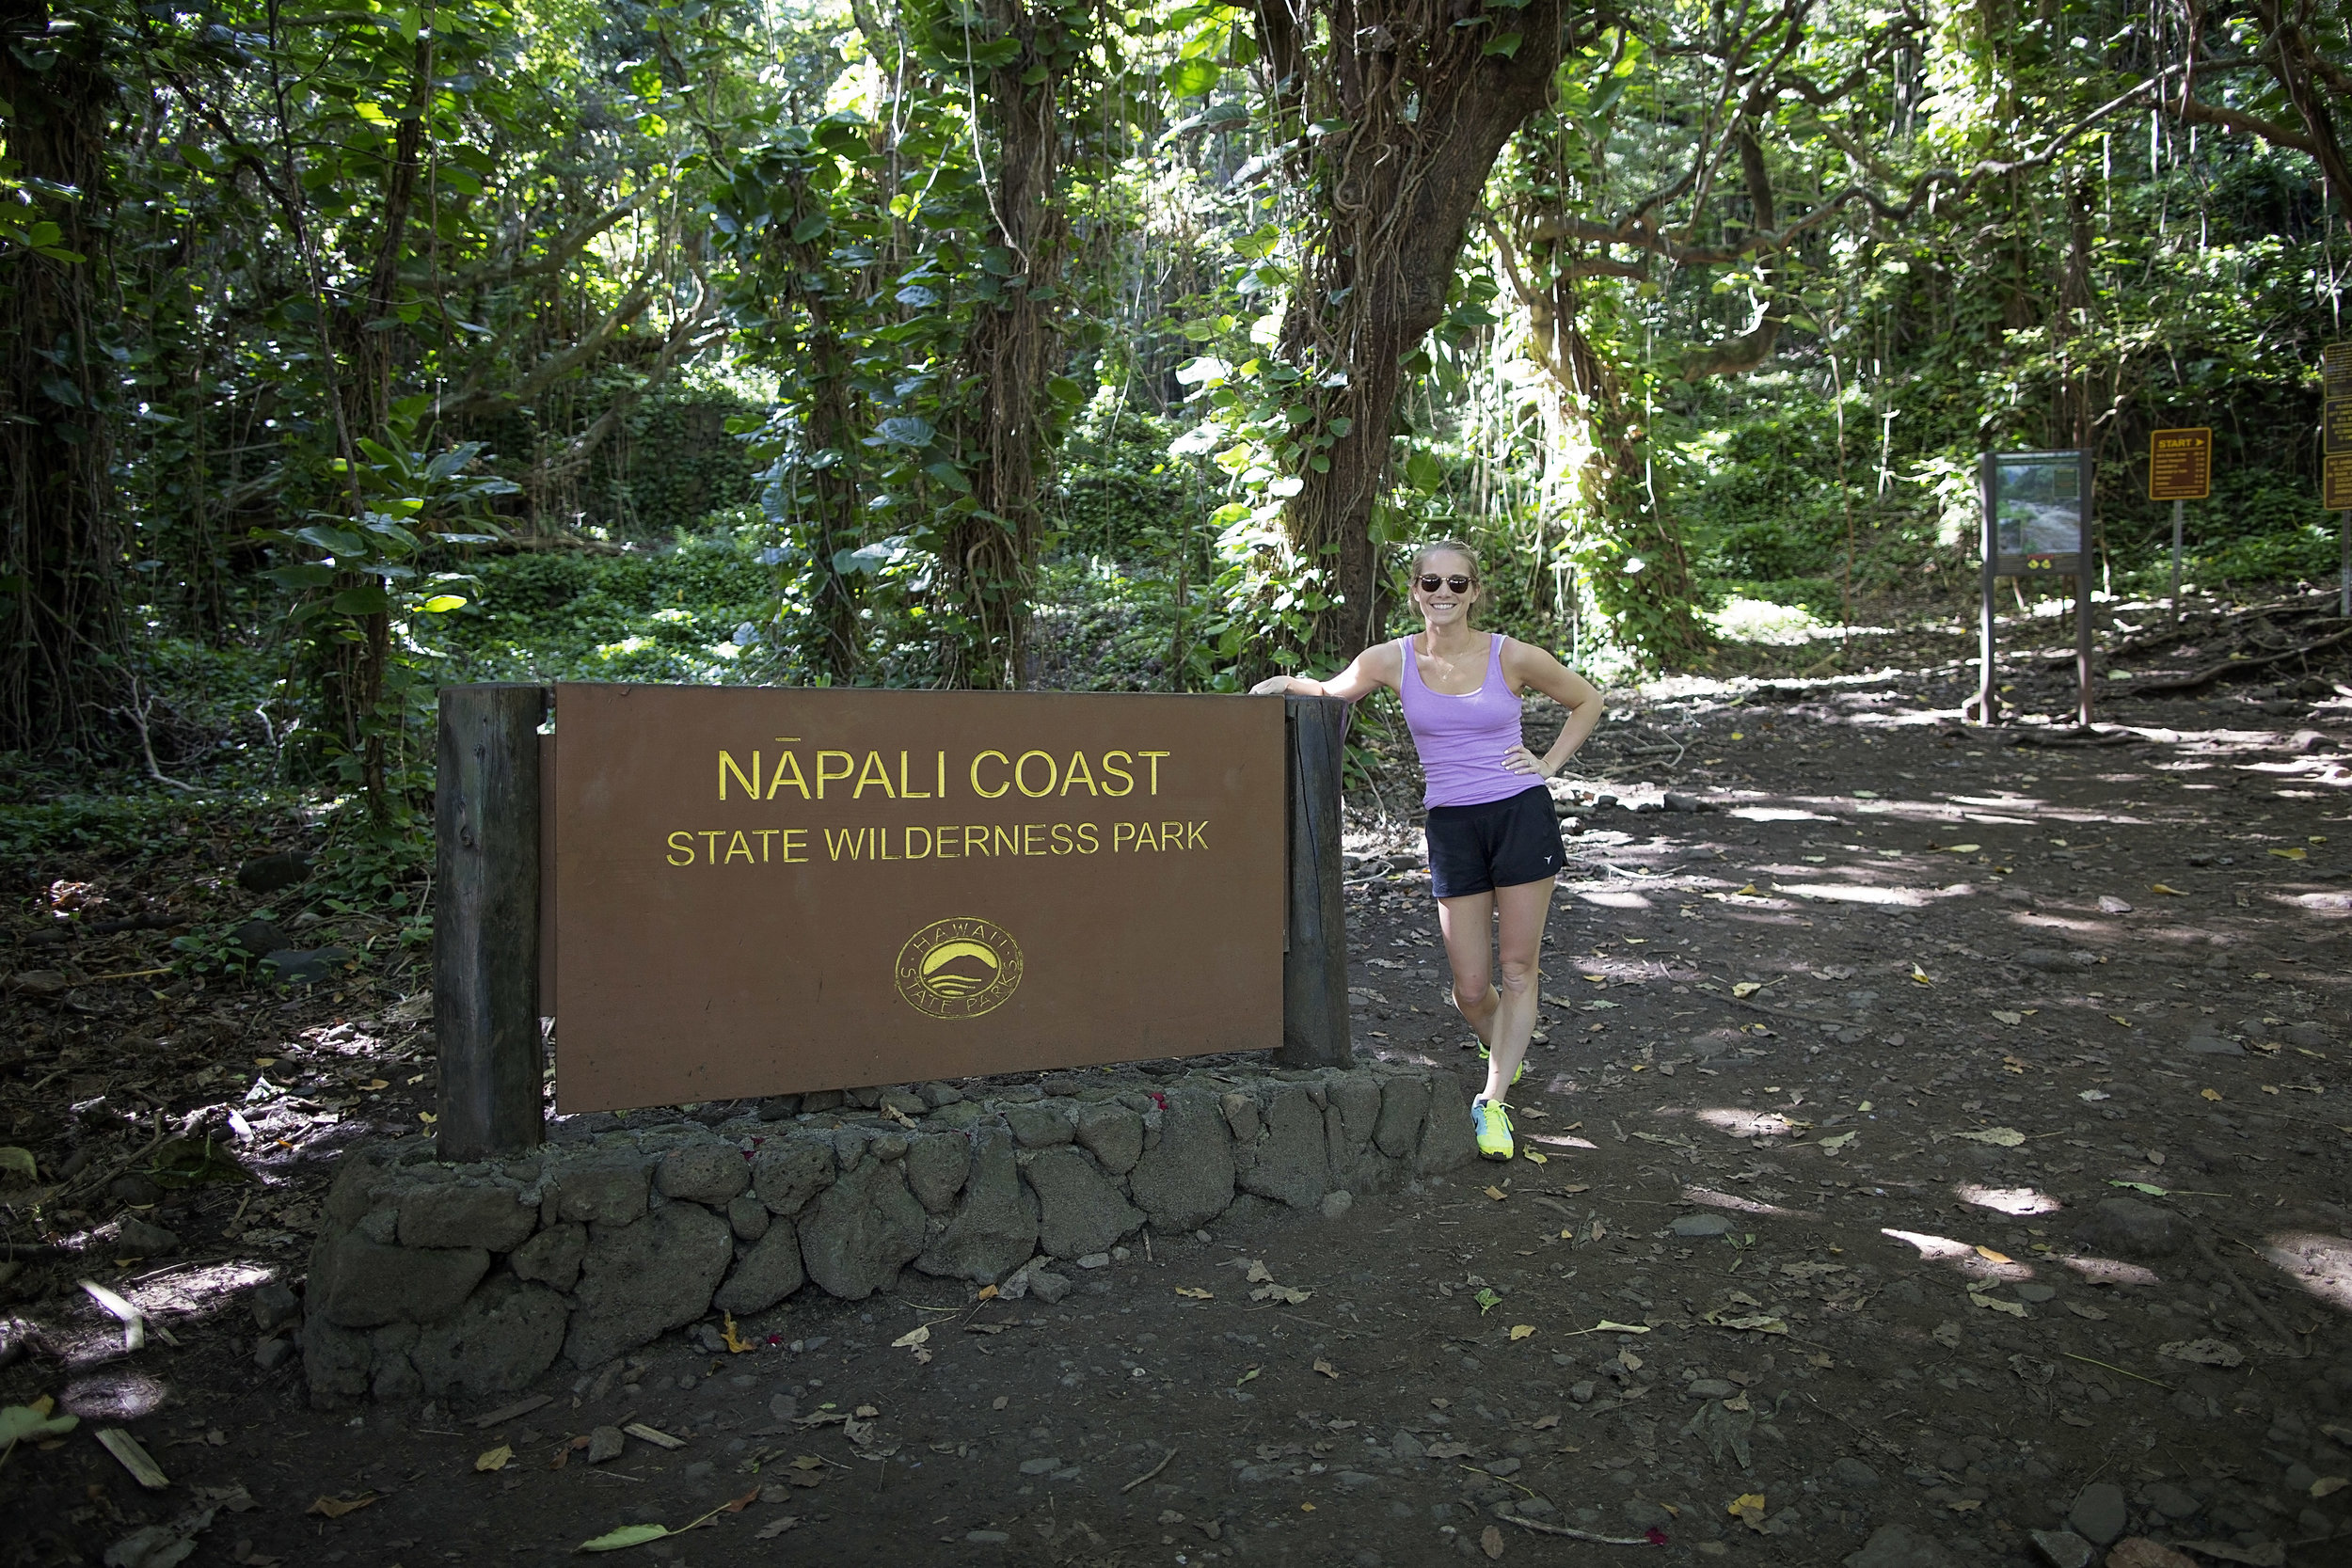 One of our favorite parts of the trip - Hiking the Napali Coast.